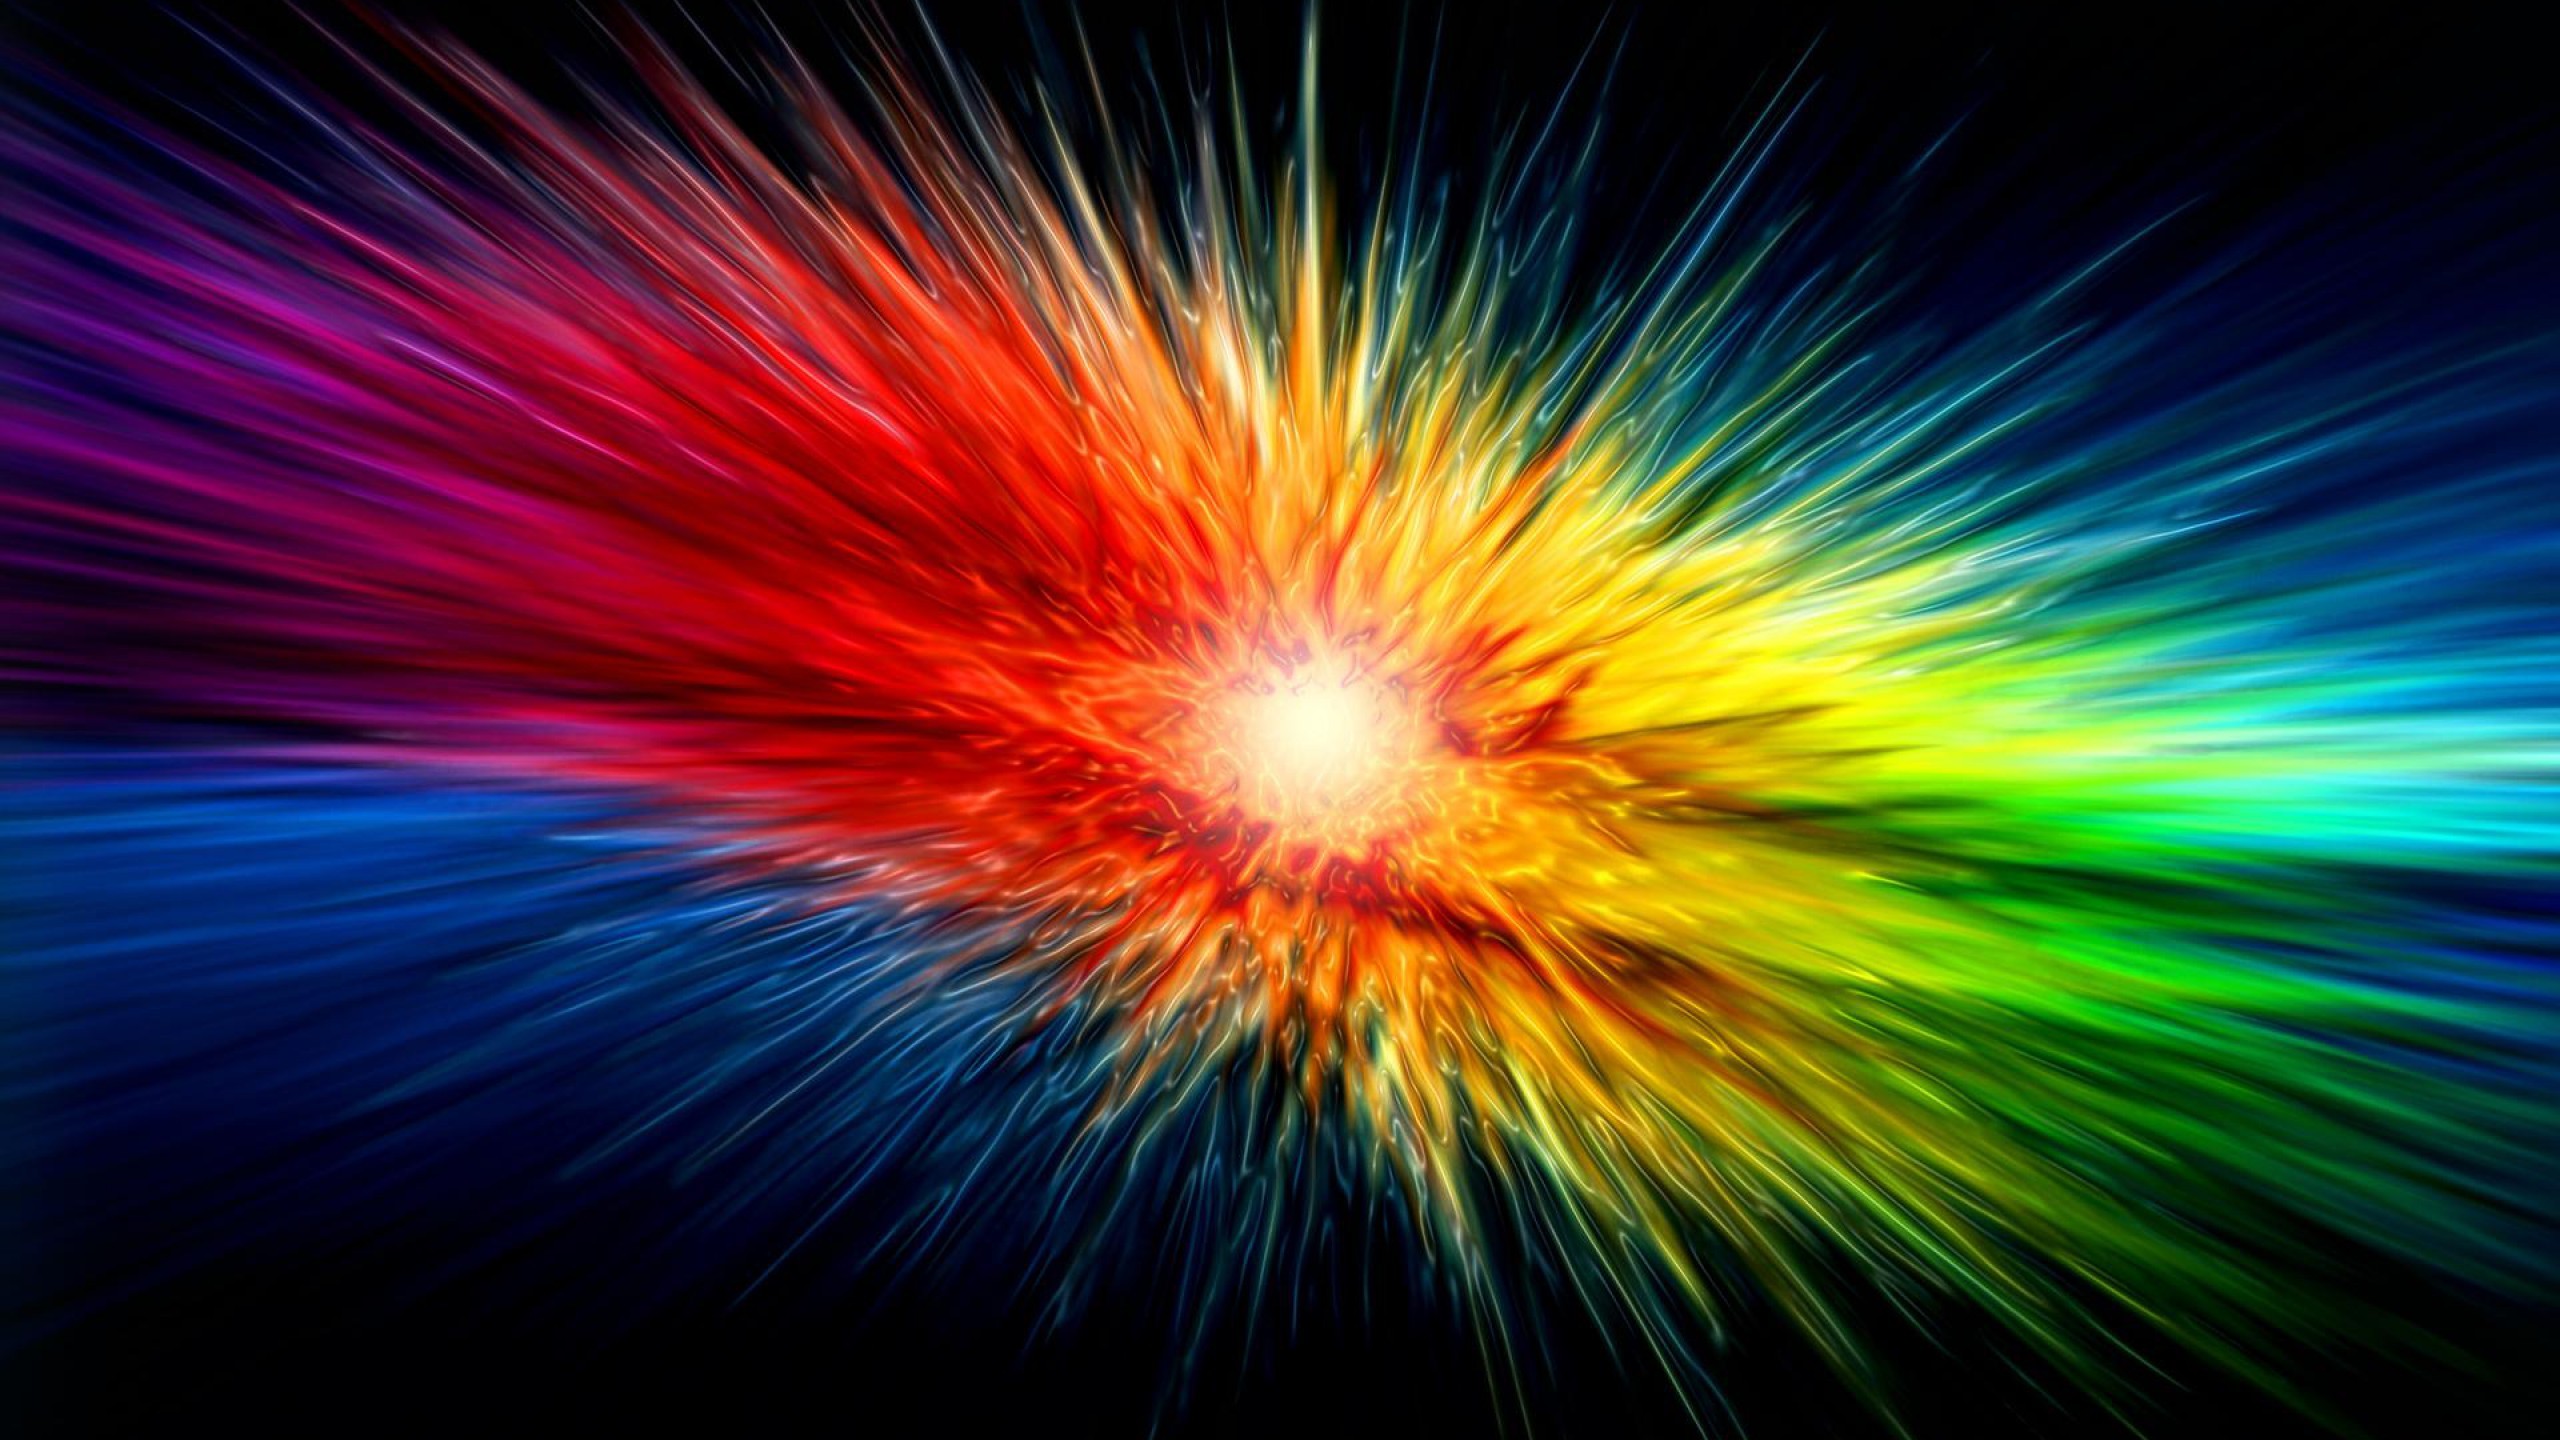 Star, Explosion, Wallpaper, Photos, For, Desktop, Background, - Lots Of Colors - HD Wallpaper 